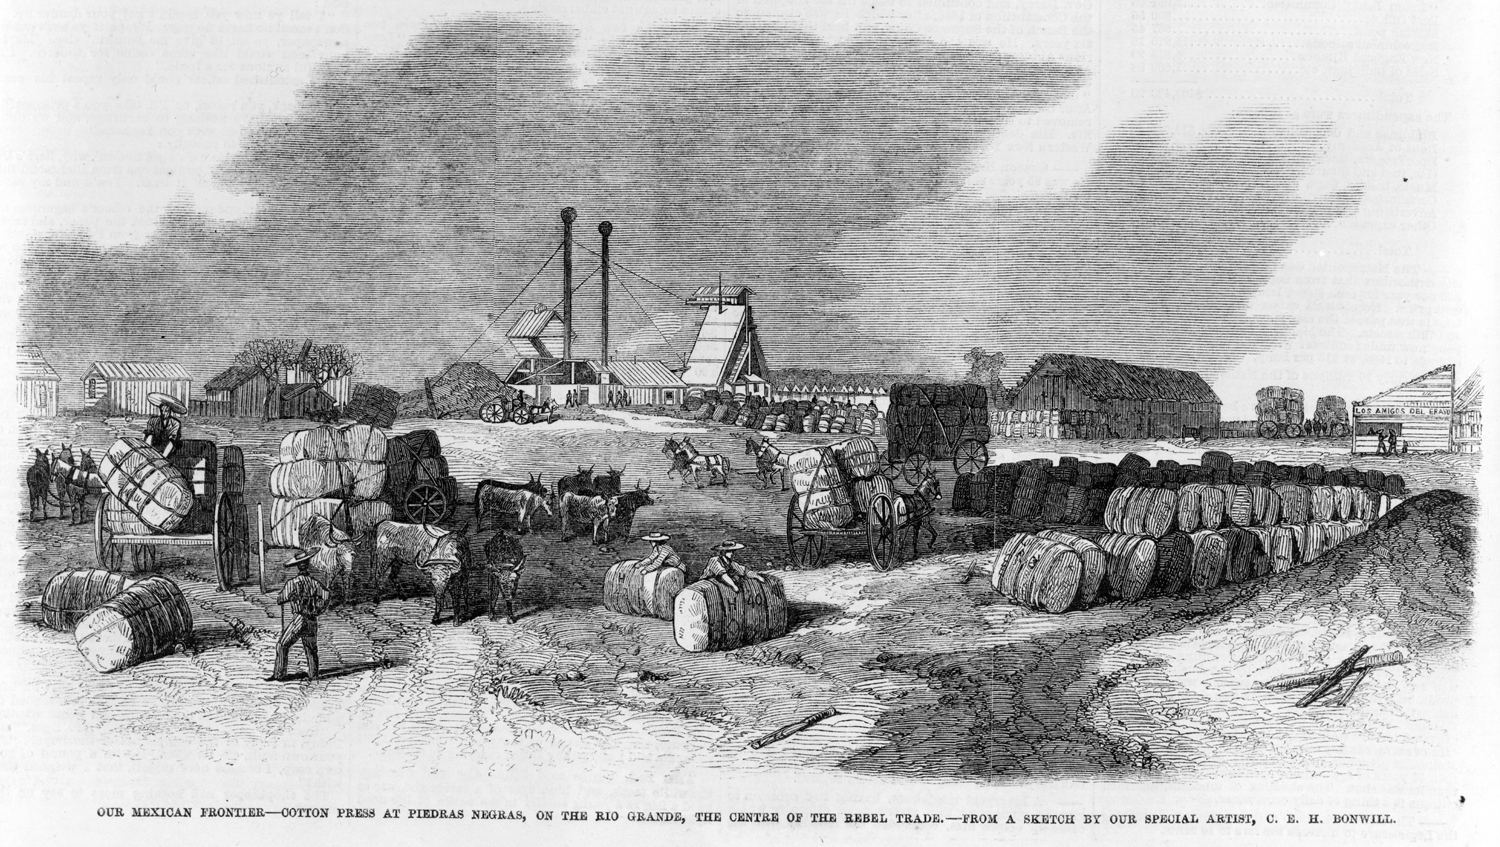 Bales of southern cotton are loaded onto carts headed into Mexico. Though the Union blockade of seaports and inland waterways was relatively successful, cutting off trade on the southern border with Mexico was not feasible. (Library of Congress image [LC-USZ62-119594])